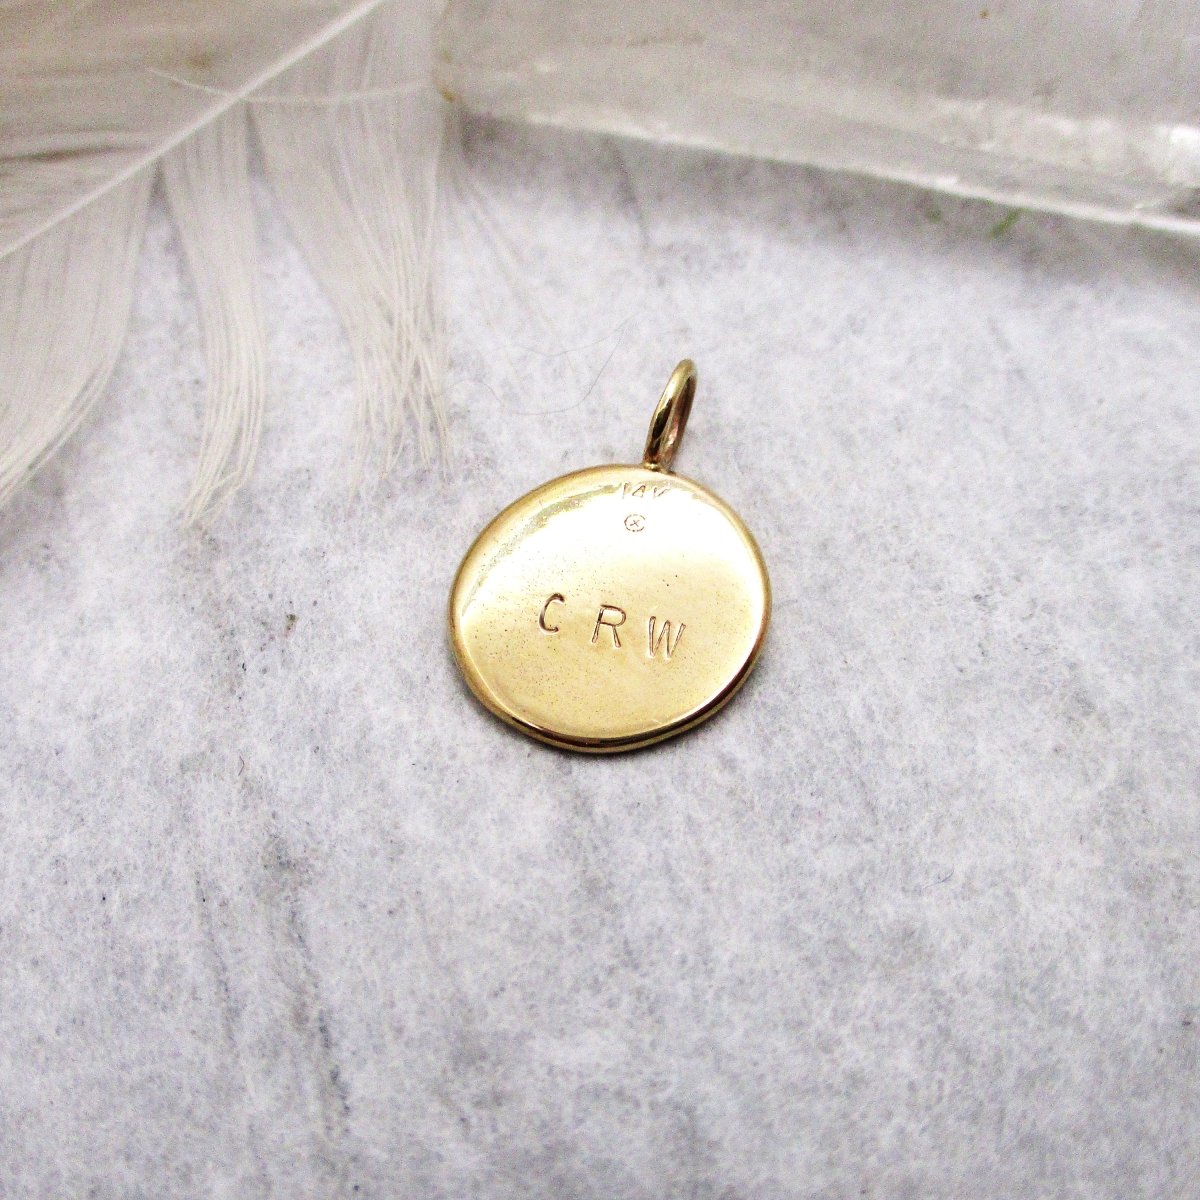 Small Size Solid 14k Gold Organic Shaped Fingerprint Pendant from Digital Image - Luxe Design Jewellery